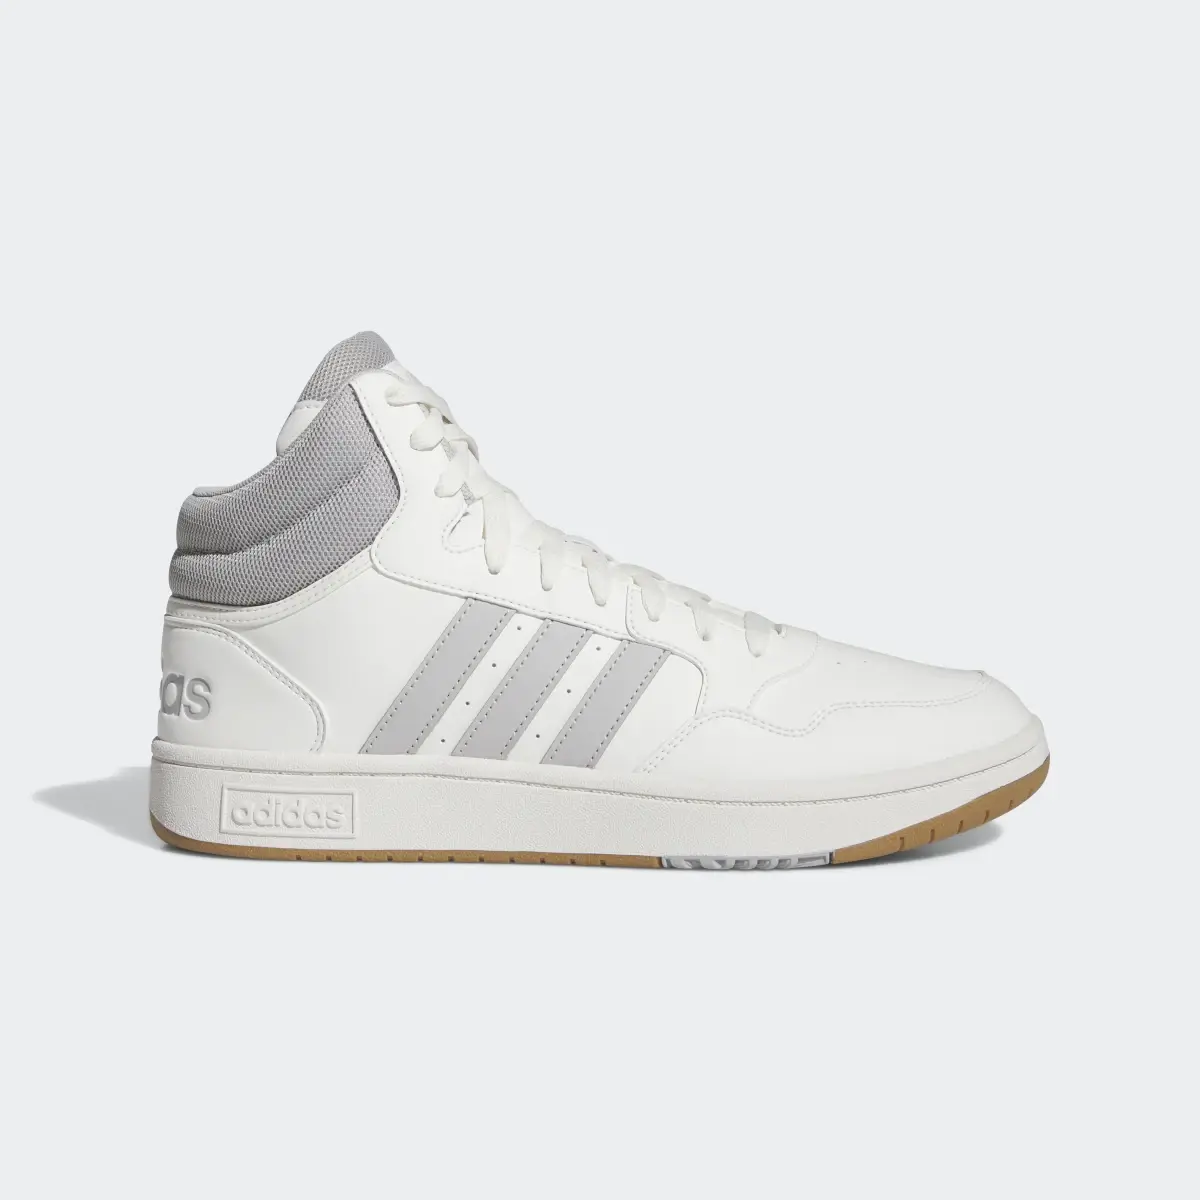 Adidas Hoops 3.0 Mid Lifestyle Basketball Classic Vintage Schuh. 2